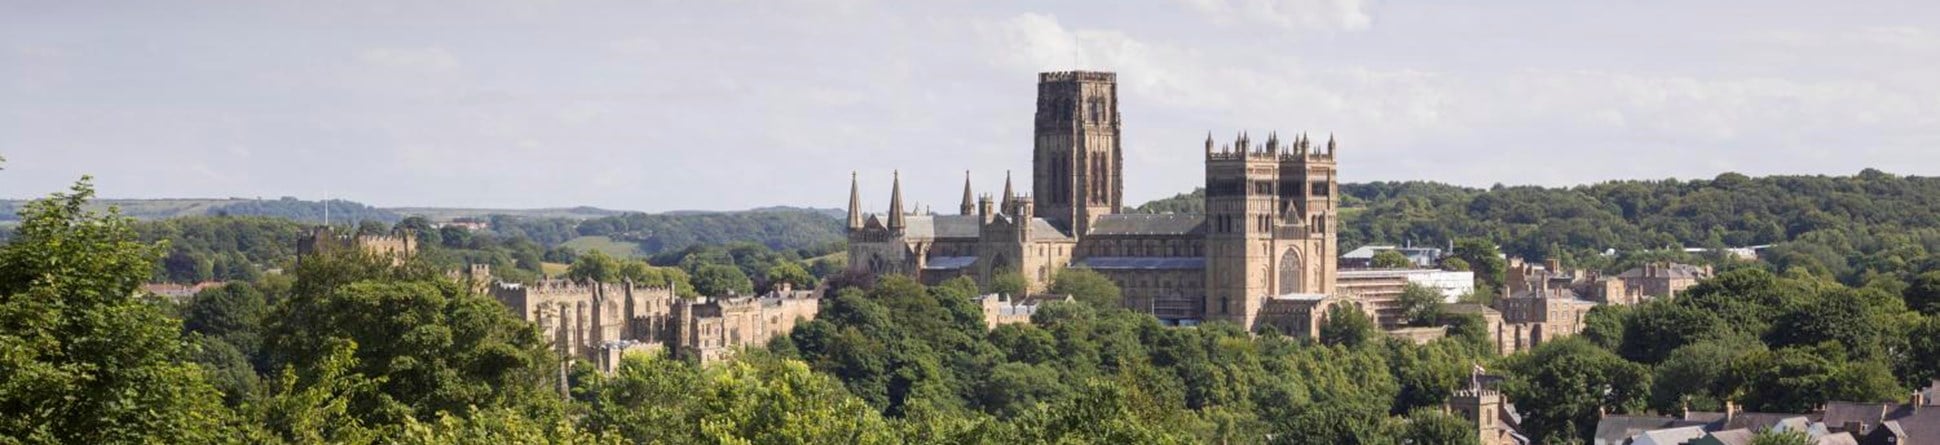 A photograph of a landscape view over the top of trees, with a cathedral in the distance underneath a blue sky.